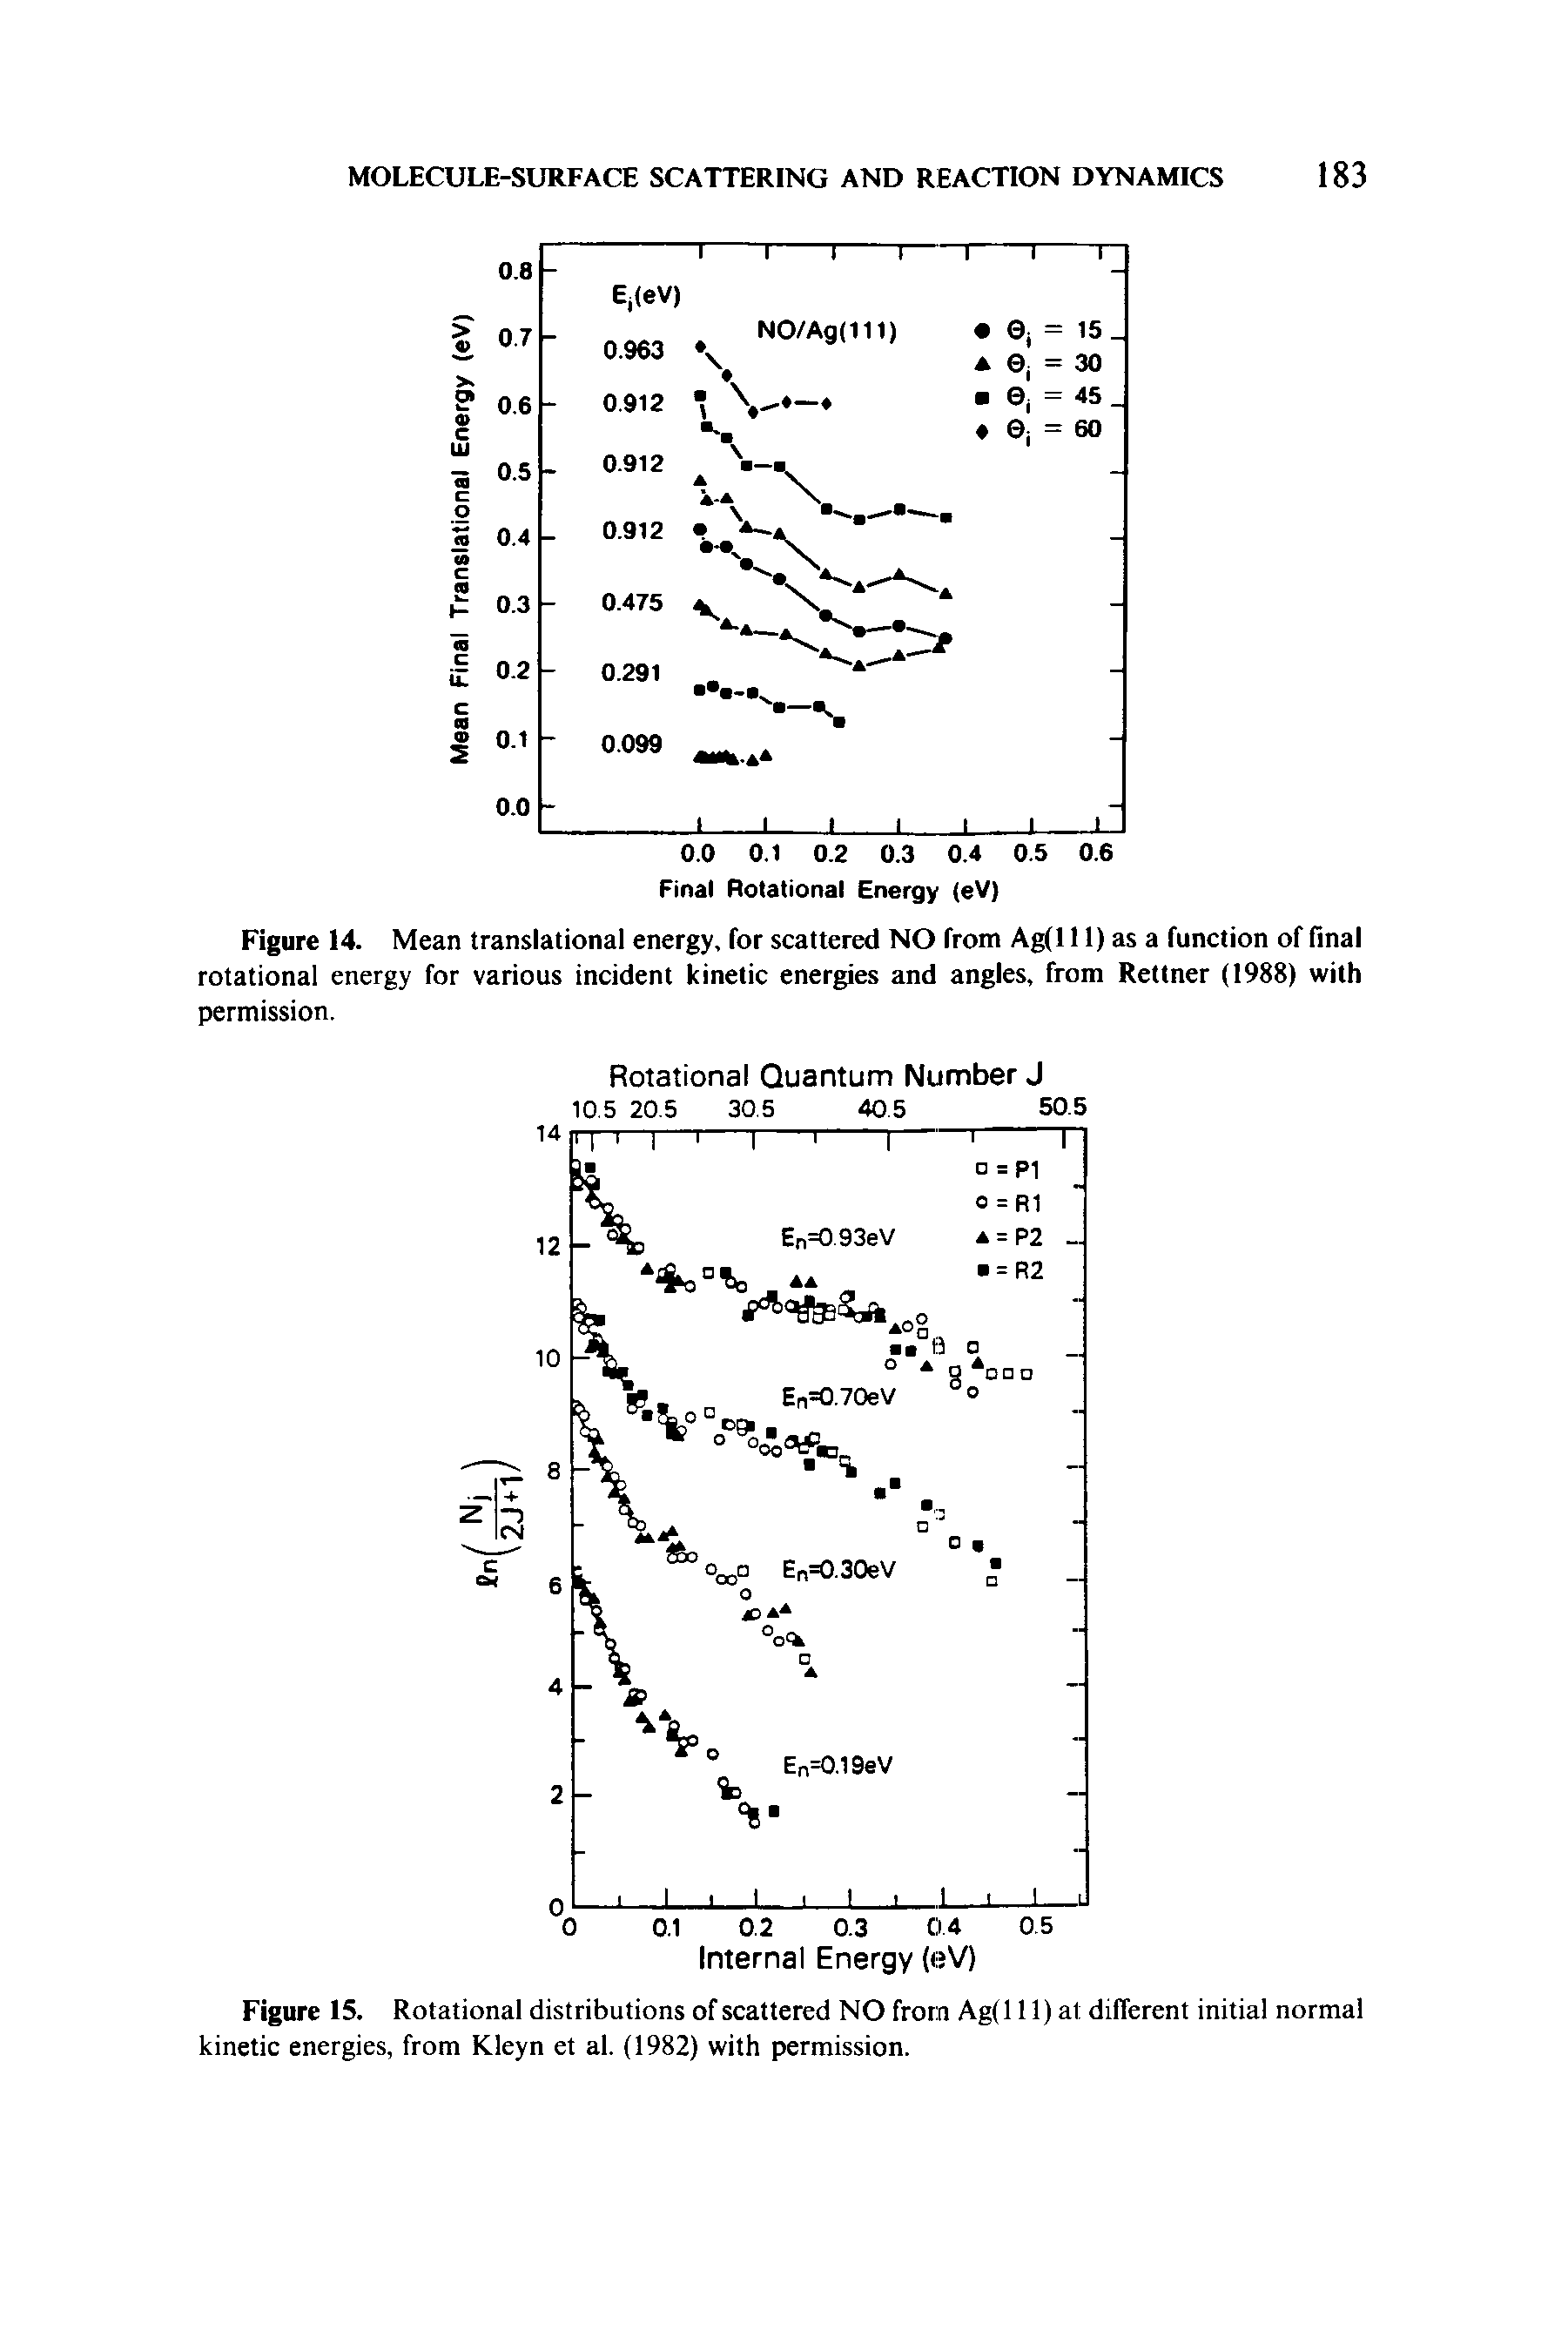 Figure 15. Rotational distributions of scattered NO from Ag(l 11) at different initial normal kinetic energies, from Kleyn et al. (1982) with permission.